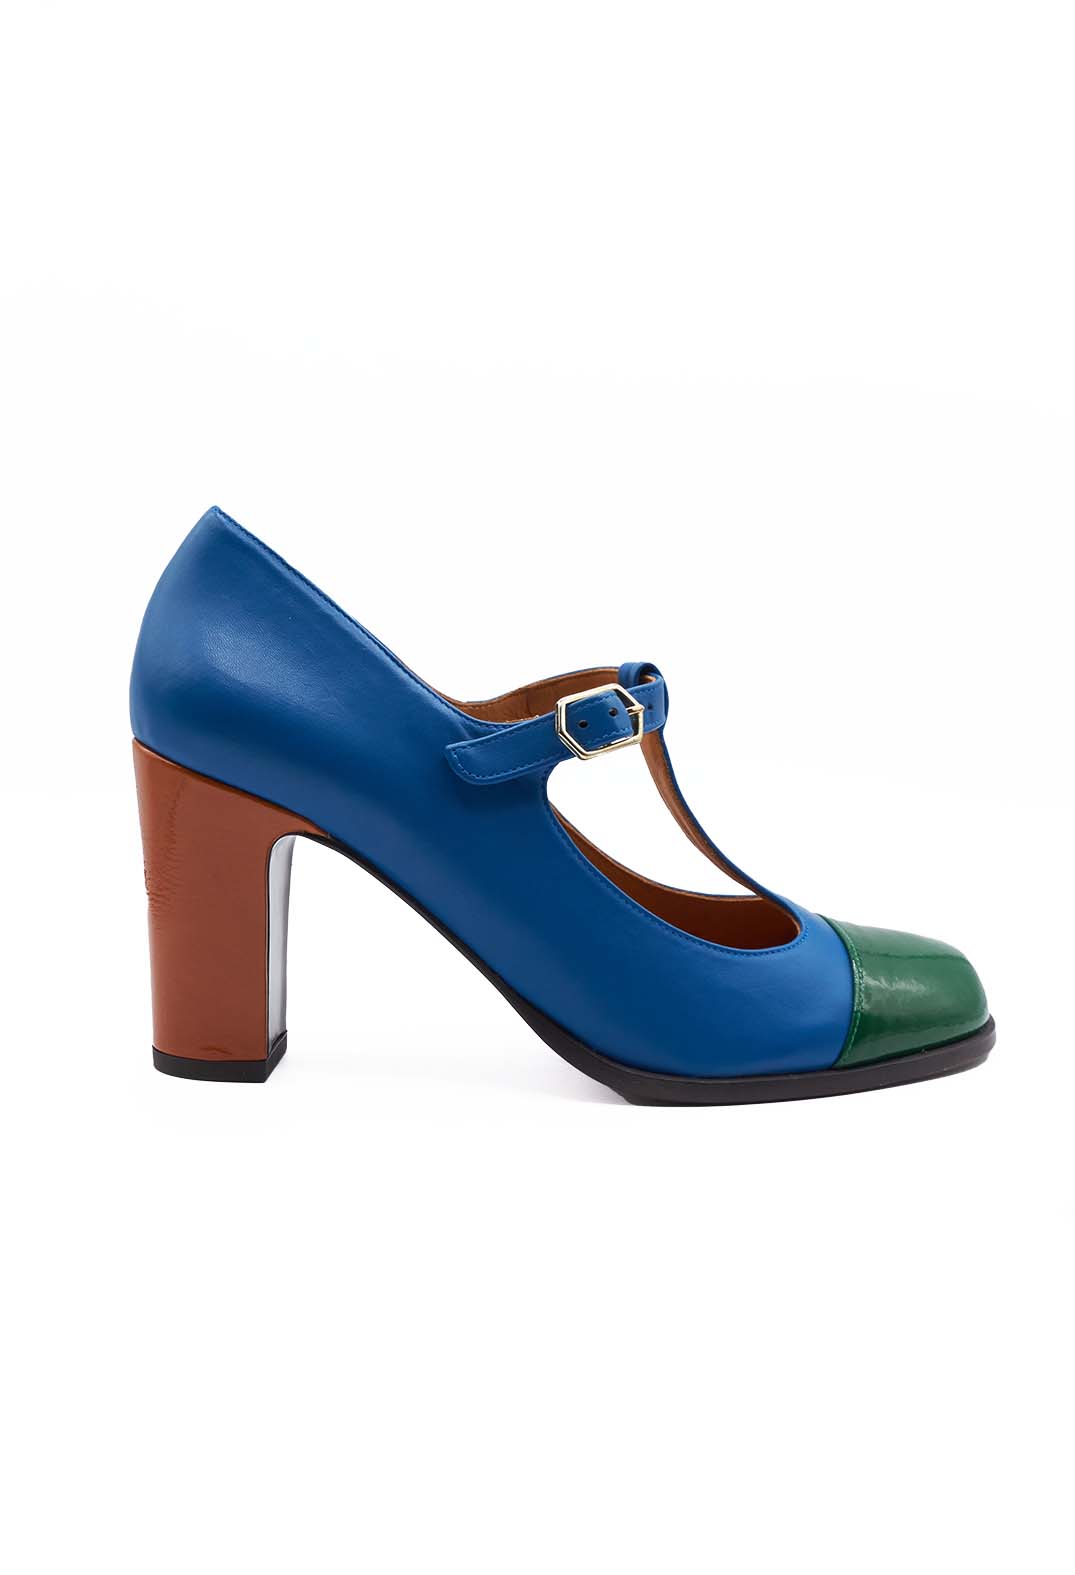 T Bar Heeled Shoes in Green and Ocean